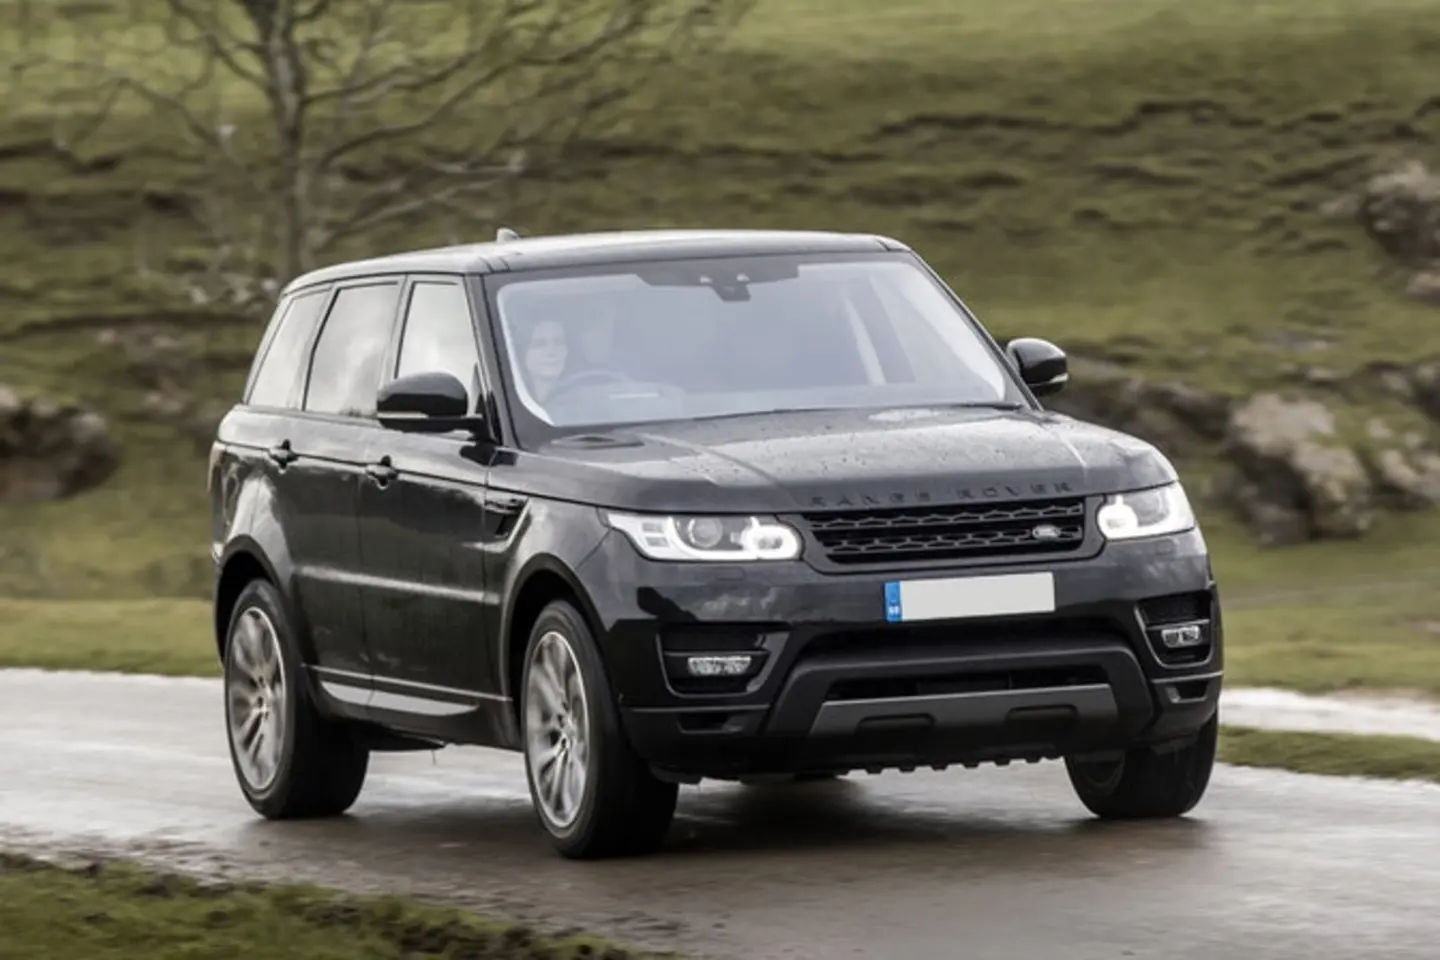 The front exterior of a black Land Rover Range Rover Sport